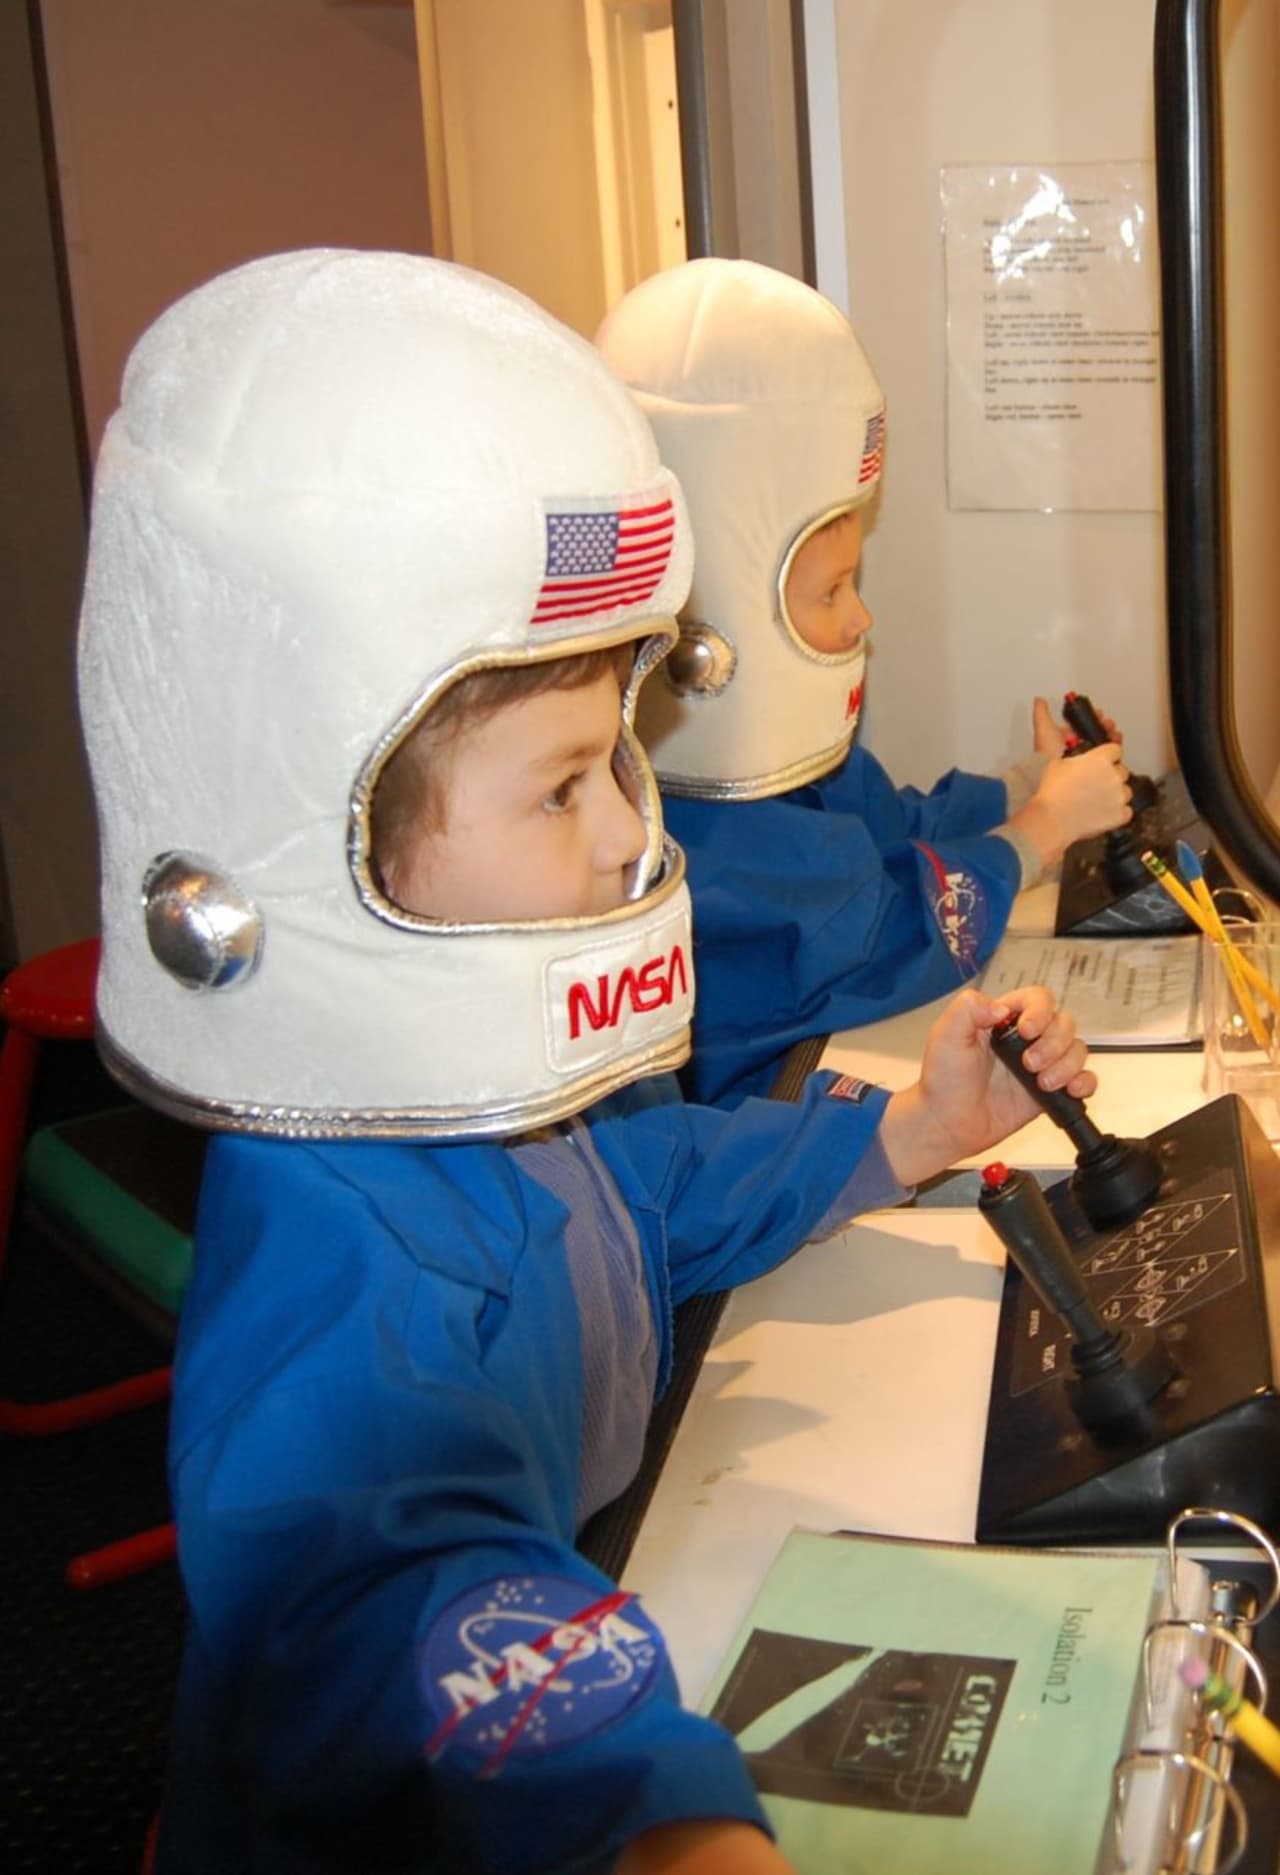 The Town of Ramapo Challenger Center offers simulated public missions to space.